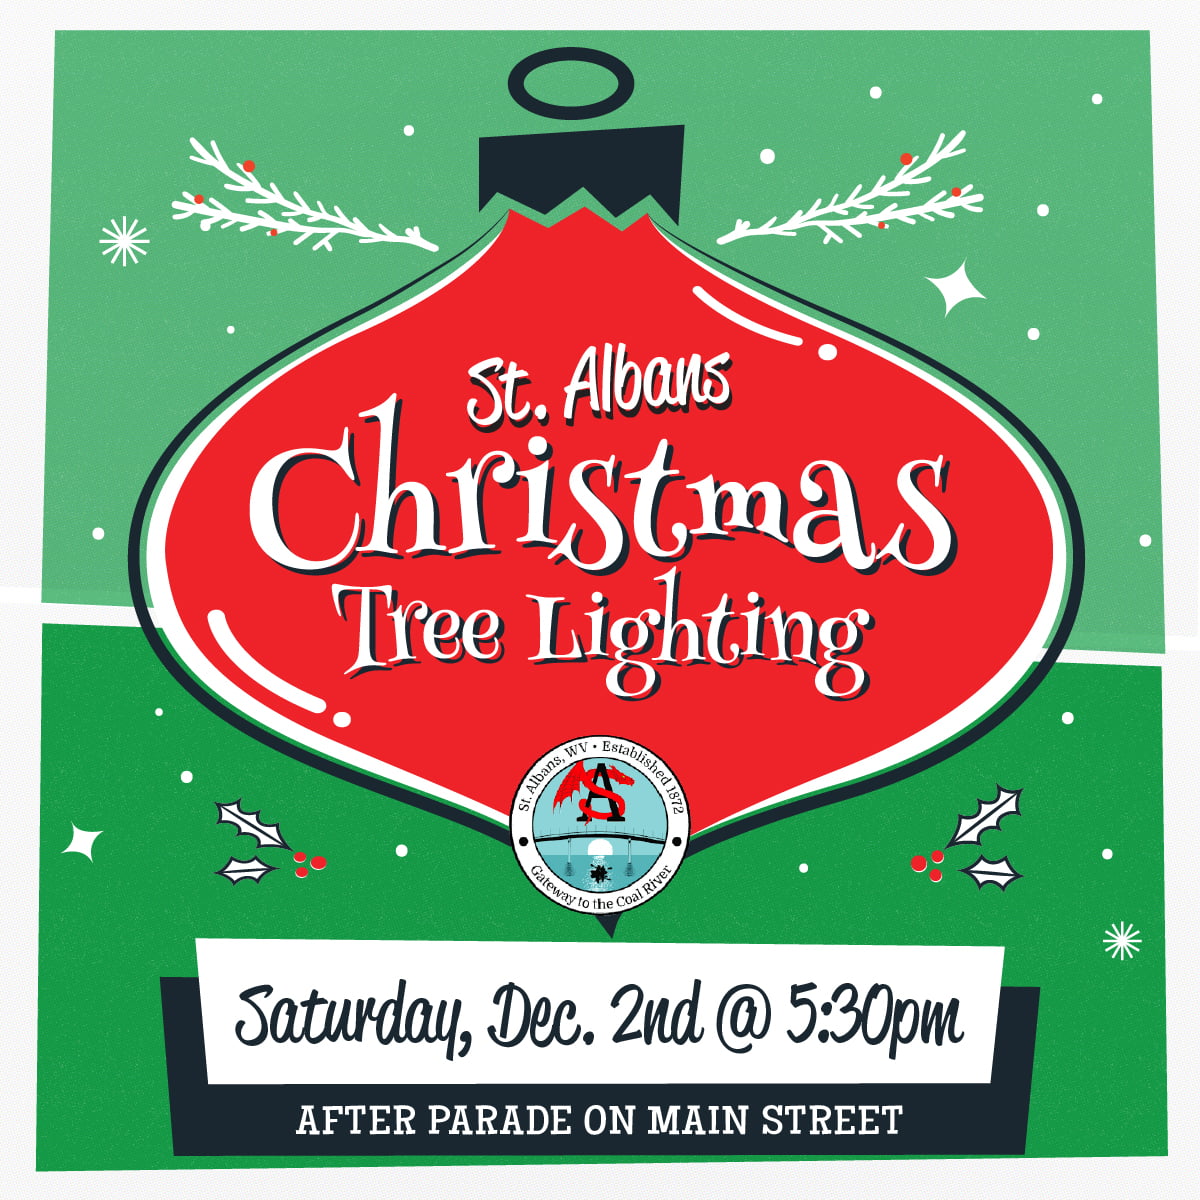 2023 St. Albans Christmas Tree Lighting - December 2nd after the Parade at 5:30pm